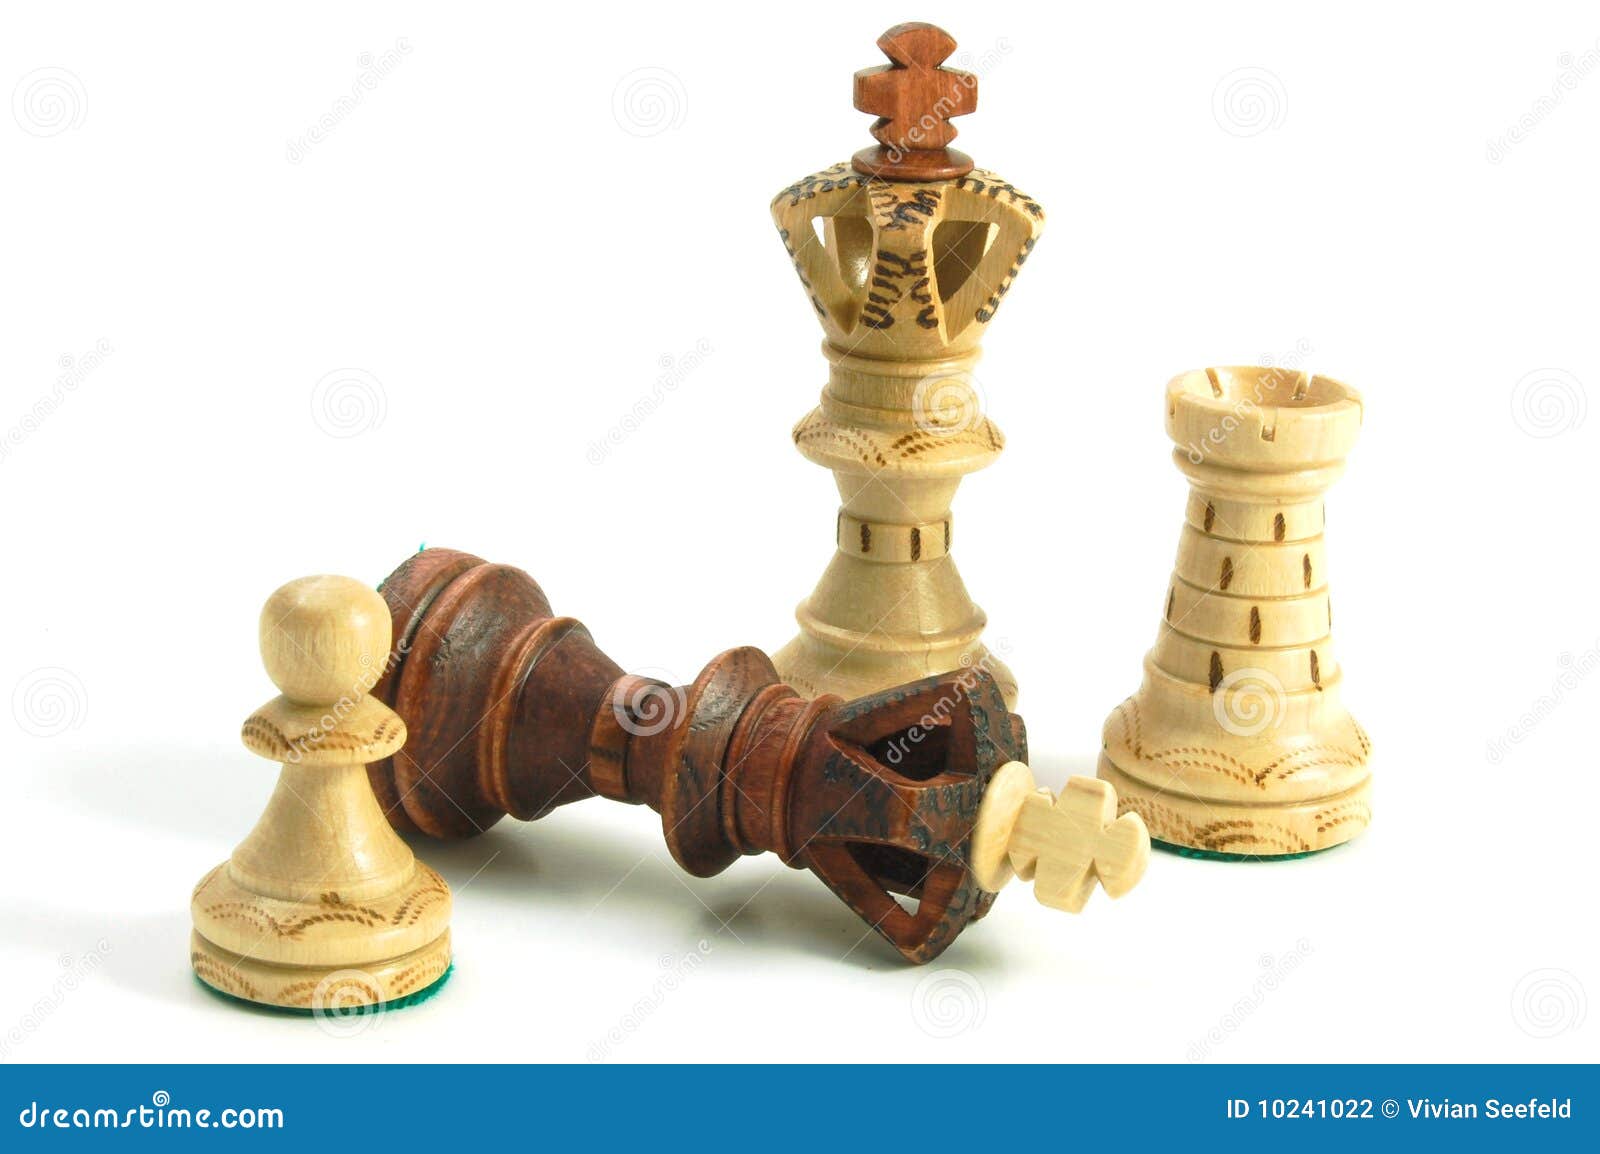 Play free chess online live